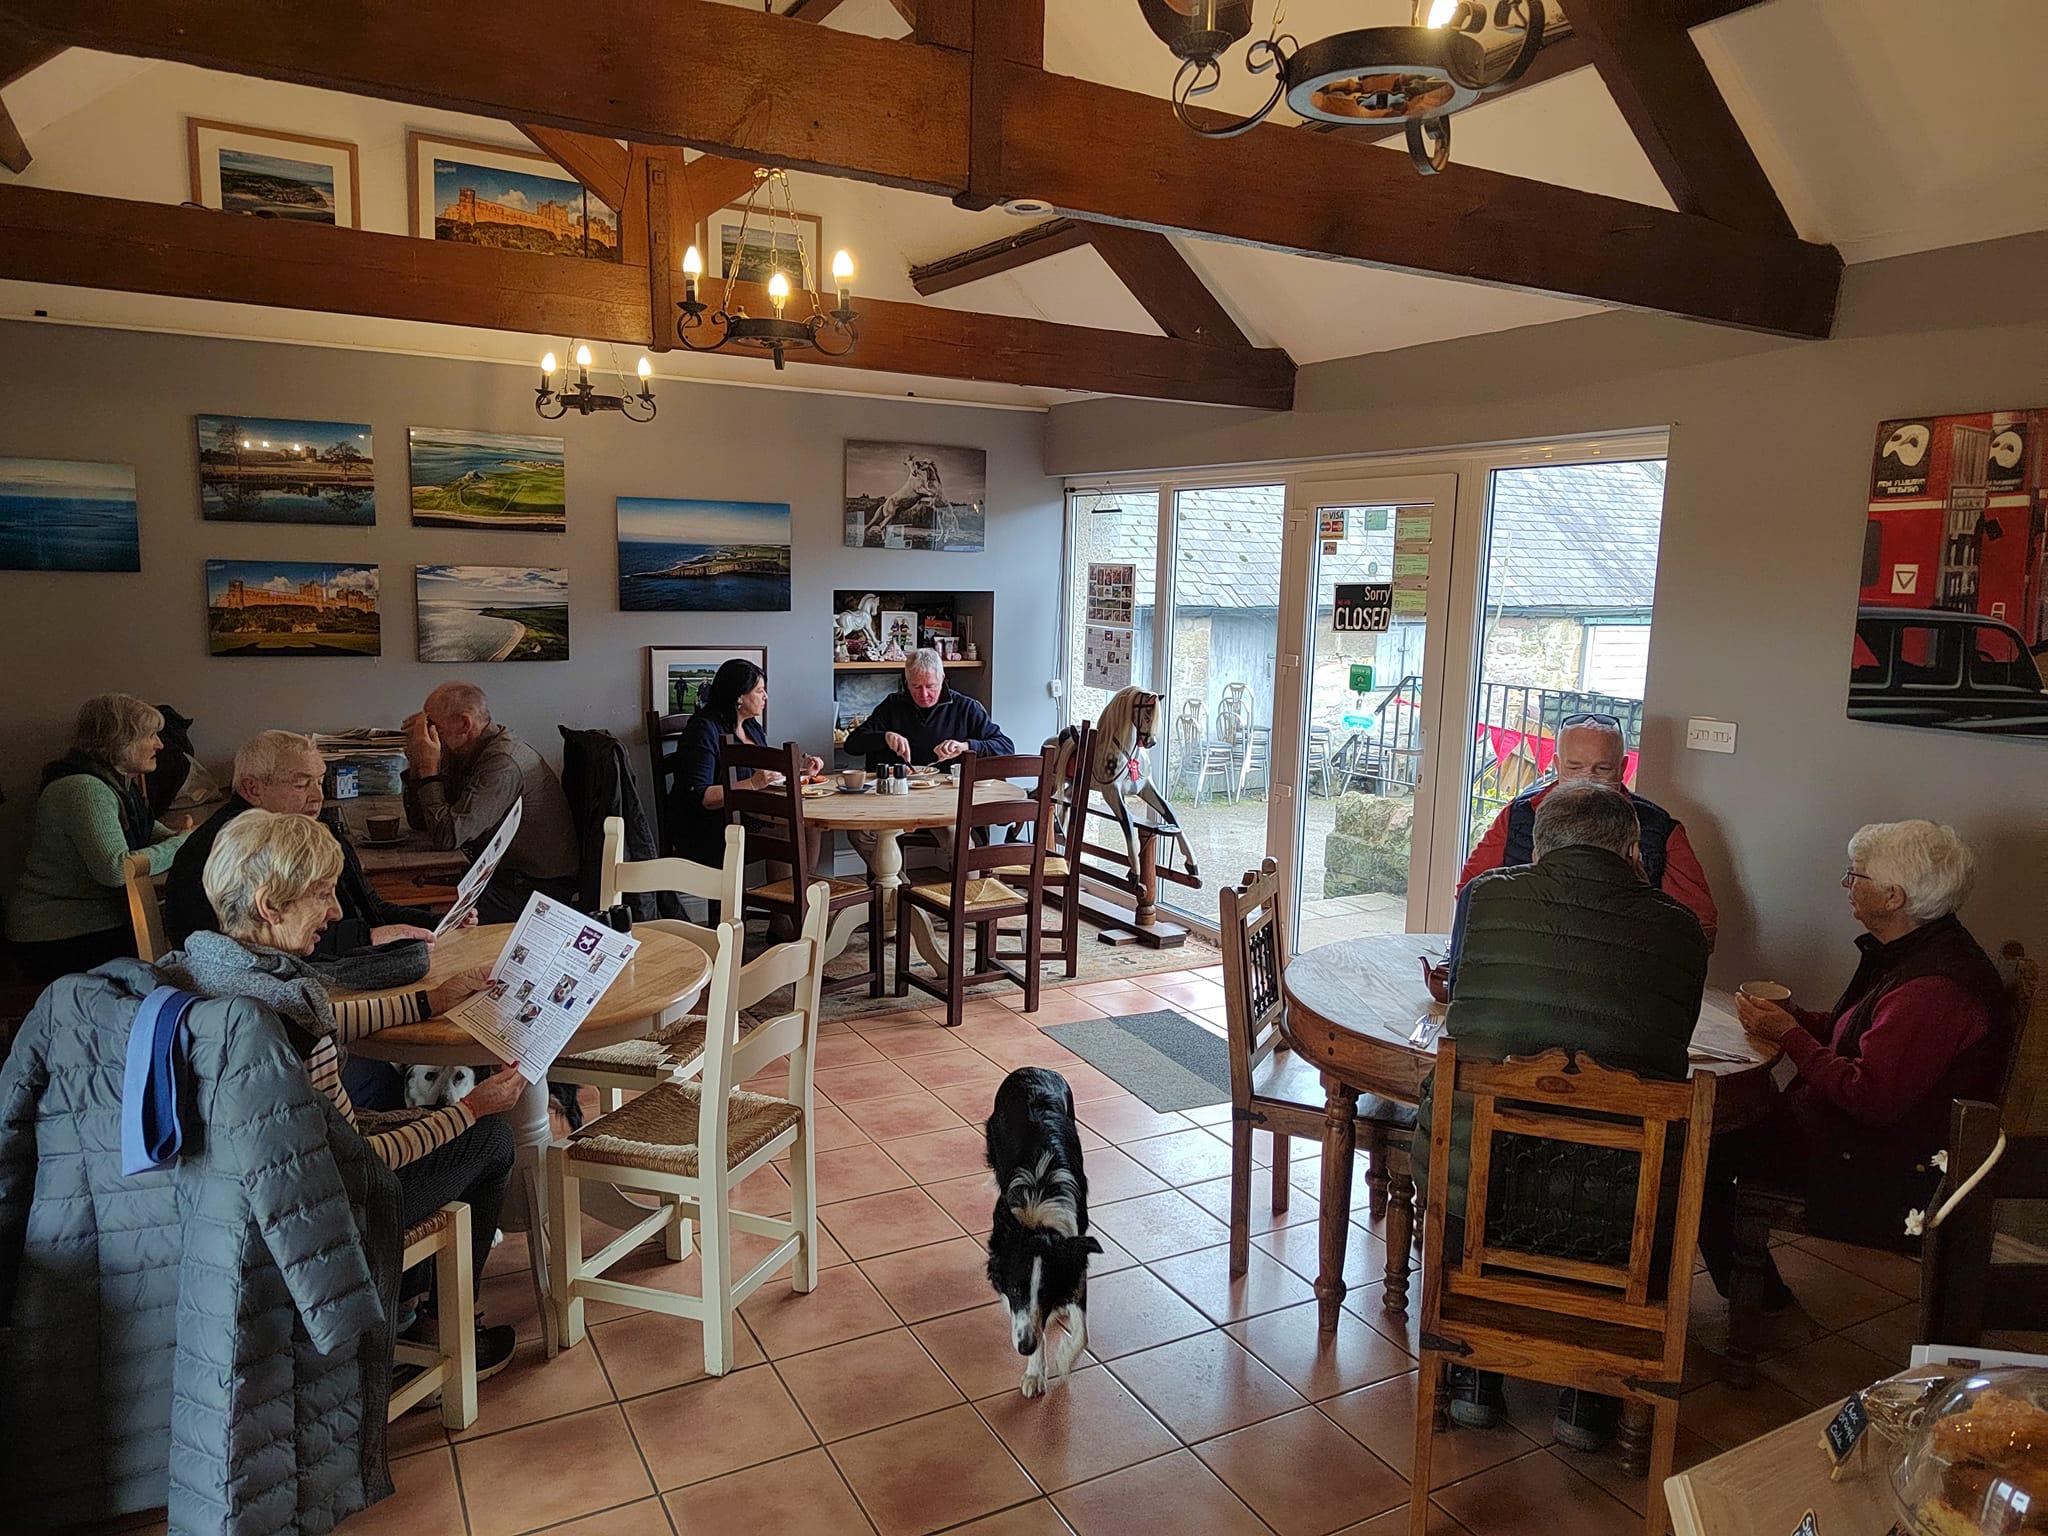 Pet Friendly Rocking Horse Cafe & Gallery